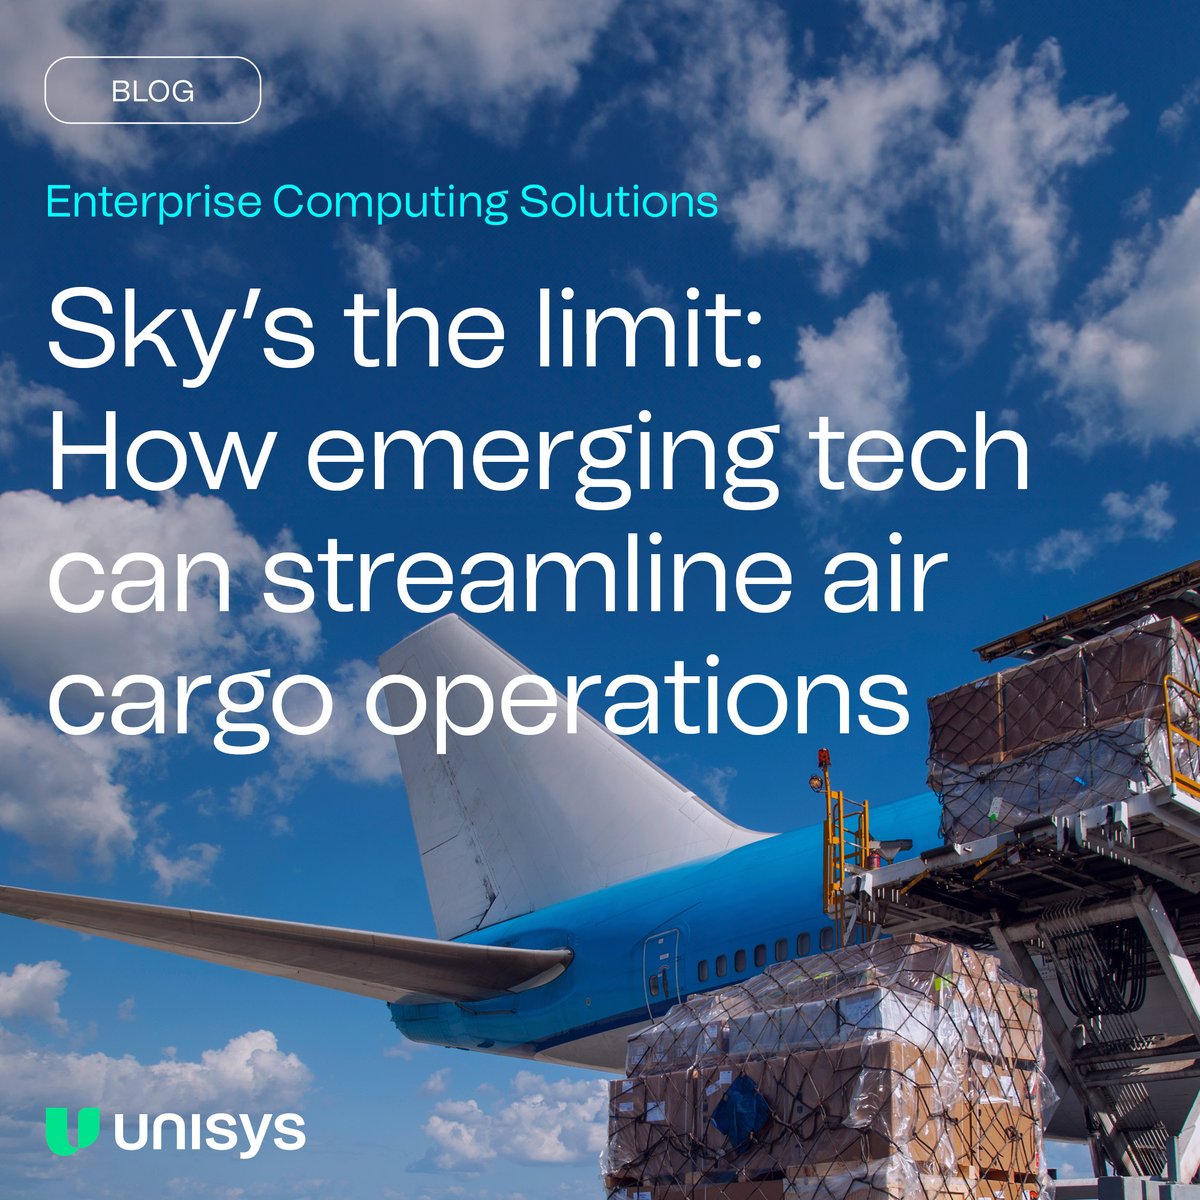 Transforming air cargo — one byte at a time. Explore how emerging technologies can help air #cargo operators maximize their margins. unisys.com/blog-post/ecs/…

#airlines #logisticsoptimization